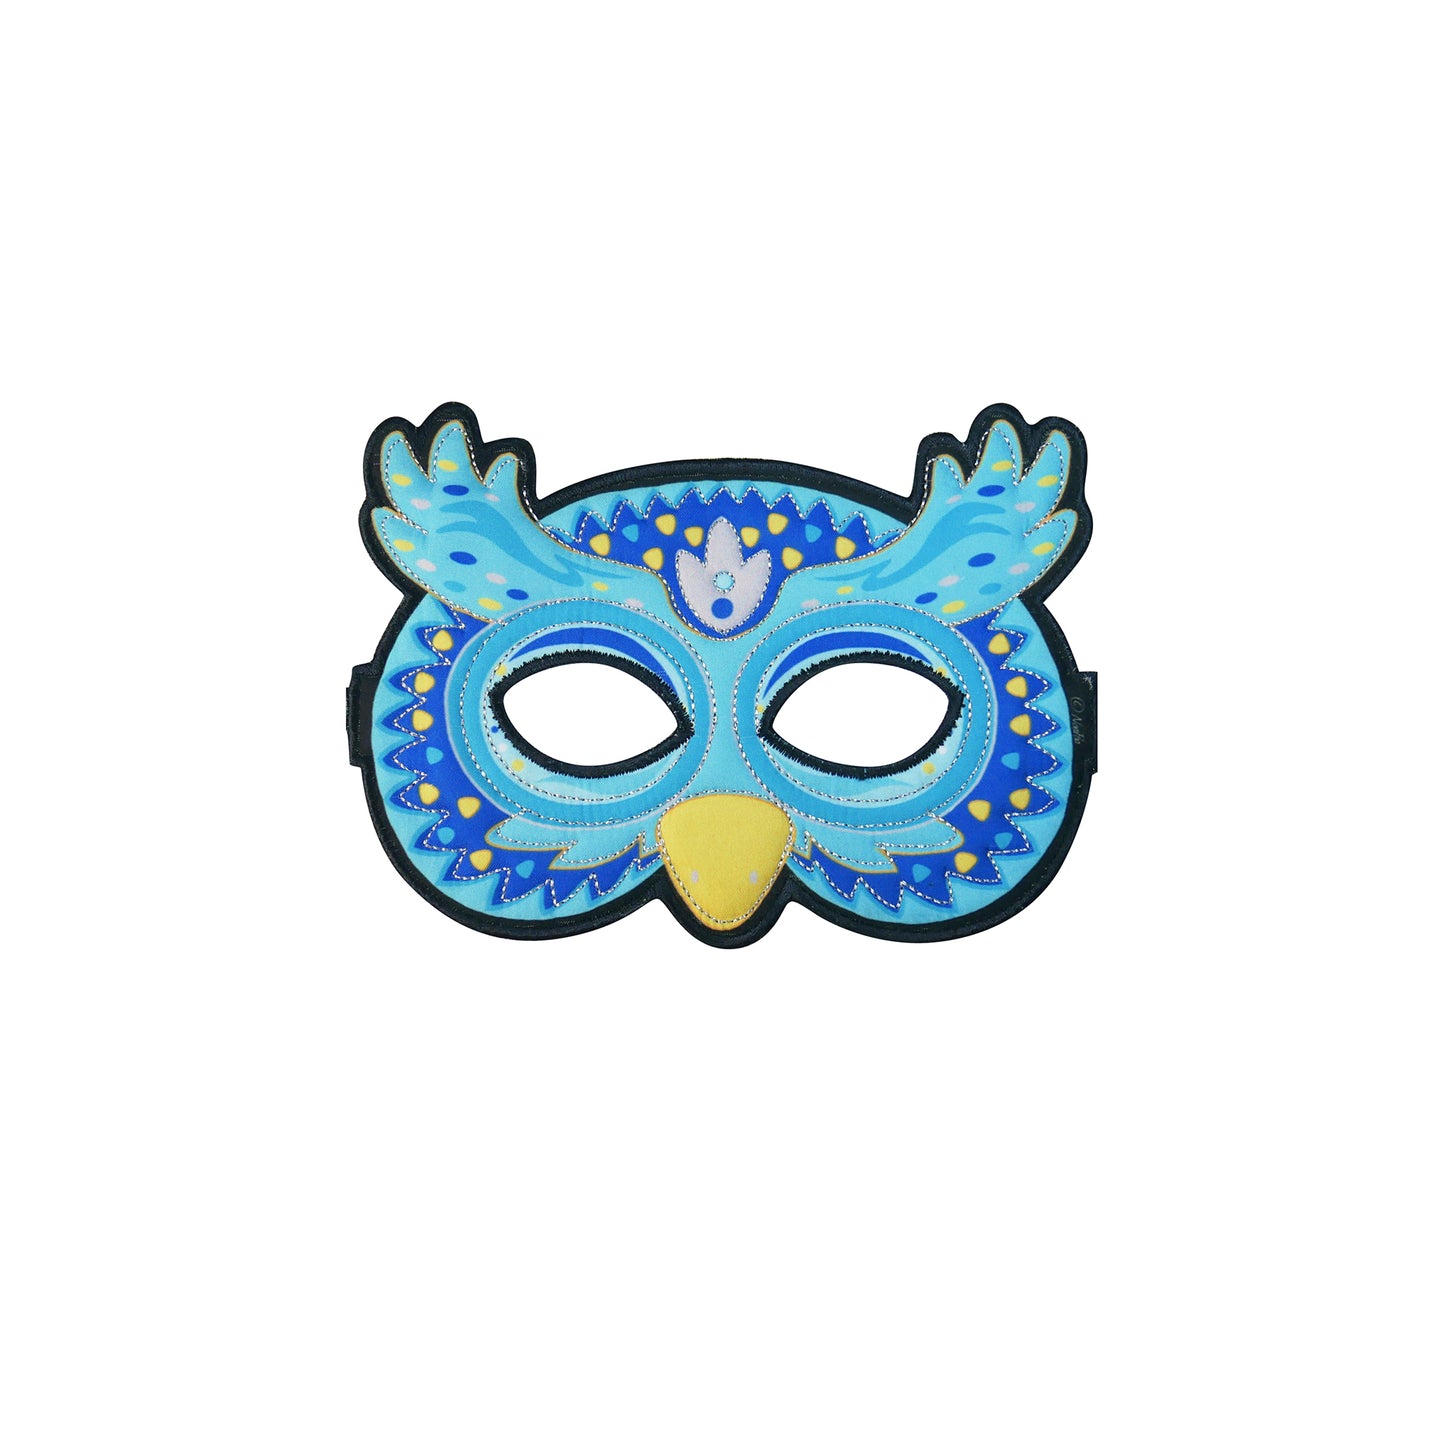 FANCIFUL FABRIC BIRD MASK in eco-friendly cotton gift bag